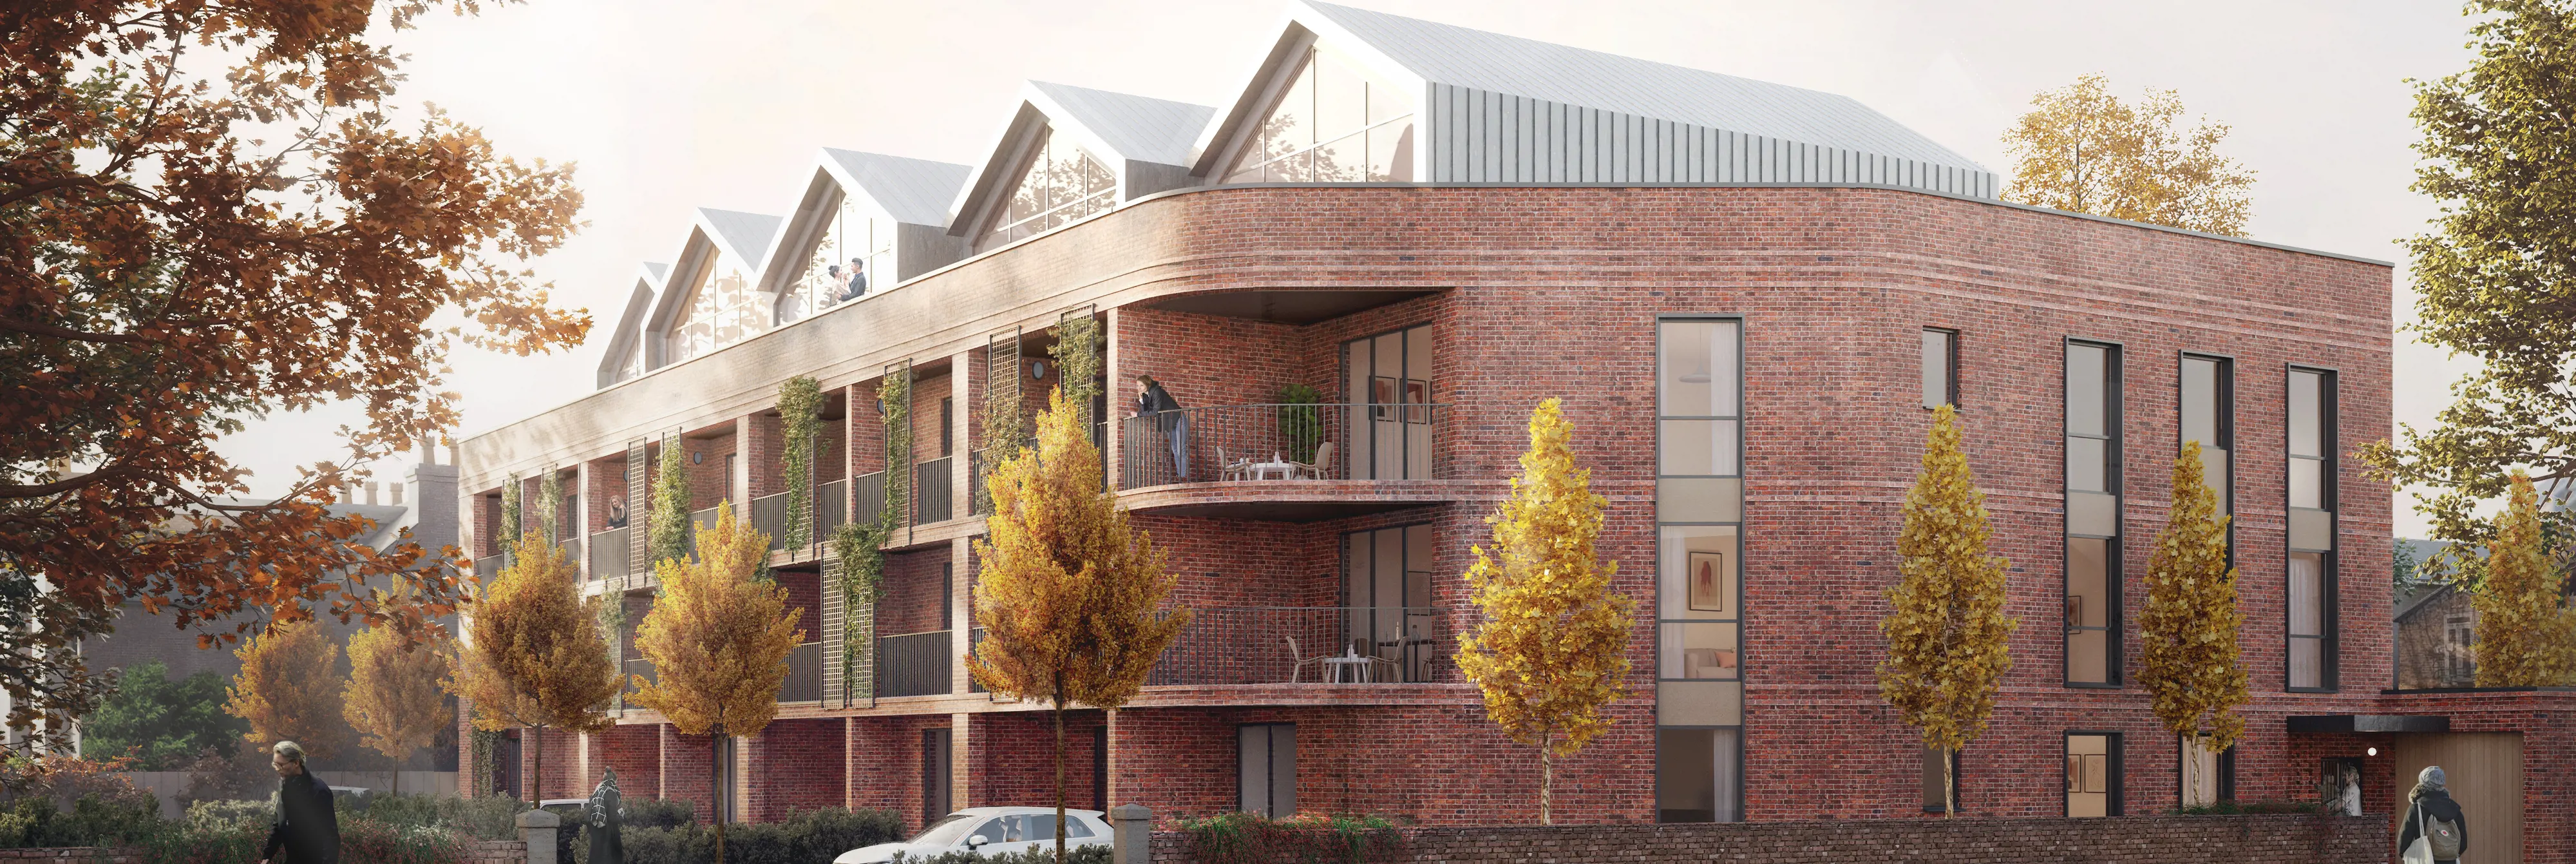 New apartments in Chorlton from Gecko